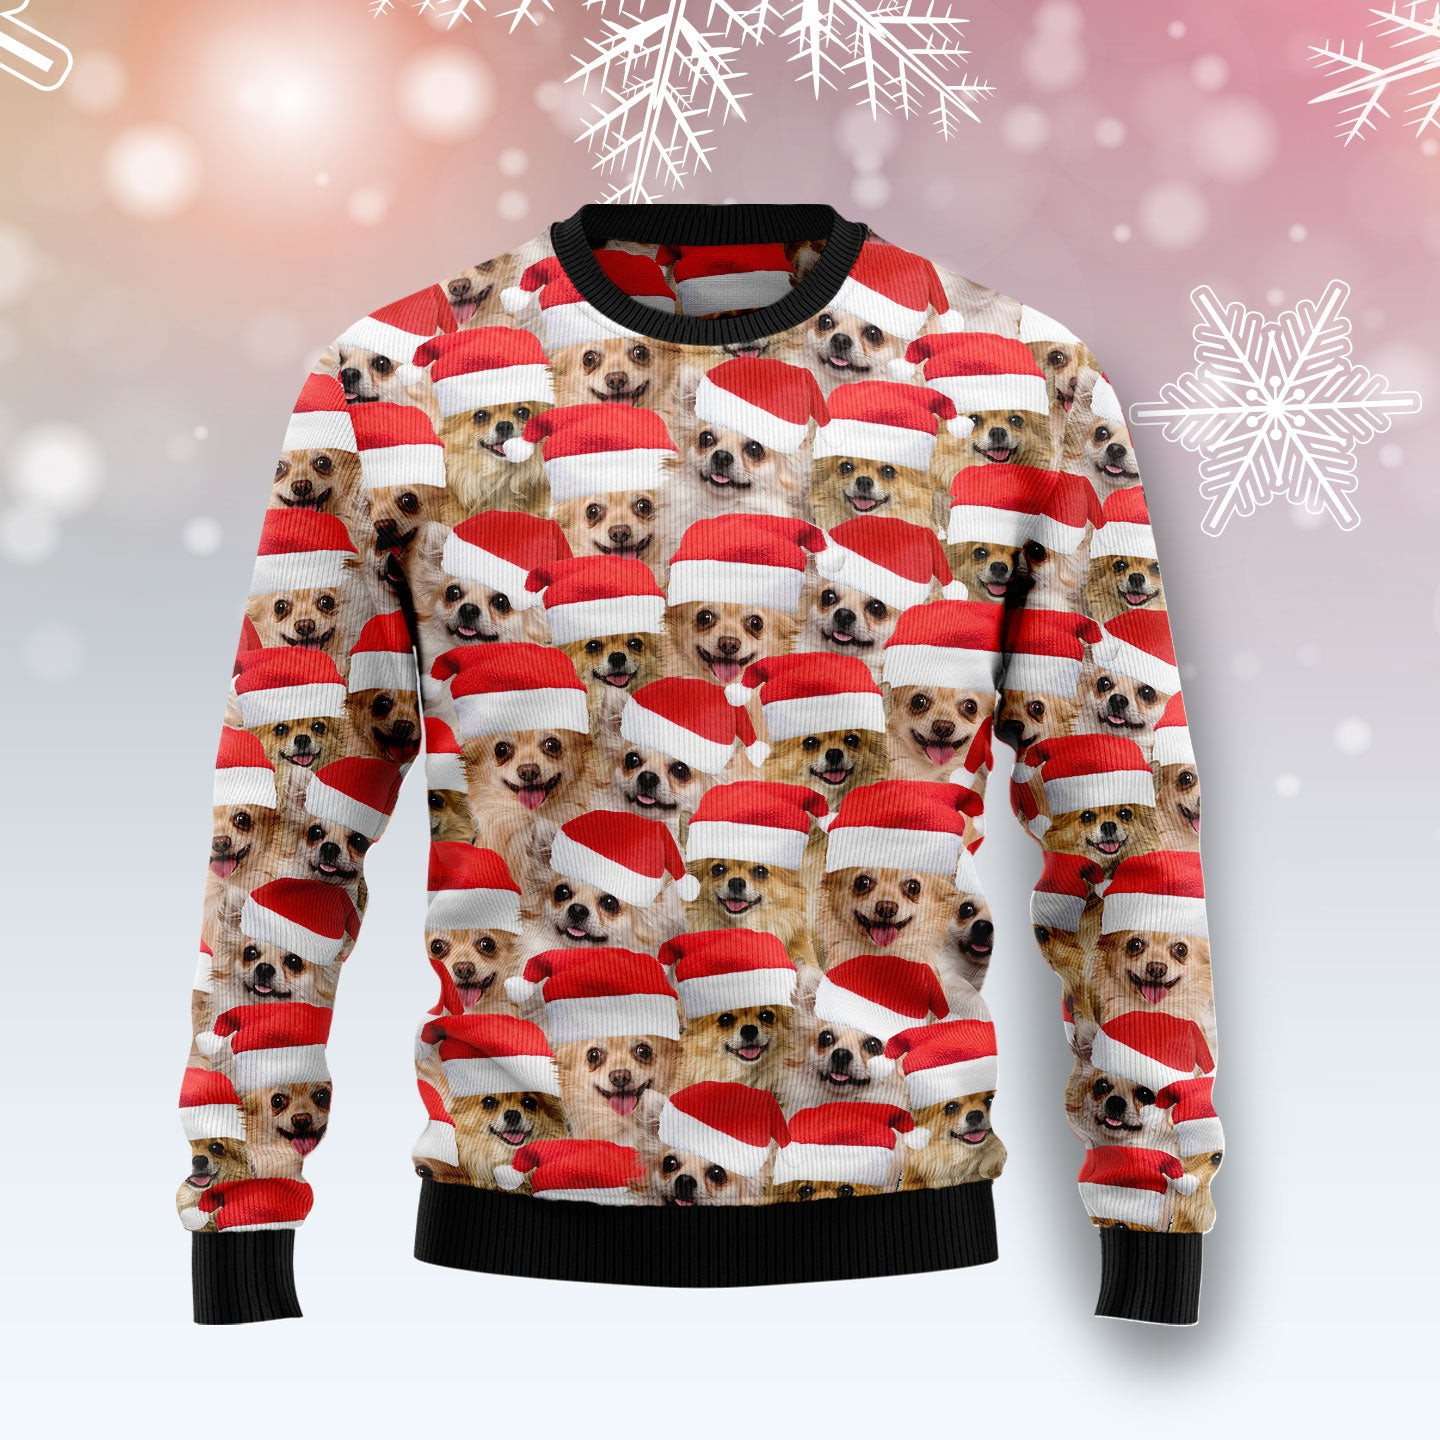 Chihuahua Group Awesome Ugly Christmas Sweater, Ugly Sweater For Men Women, Holiday Sweater